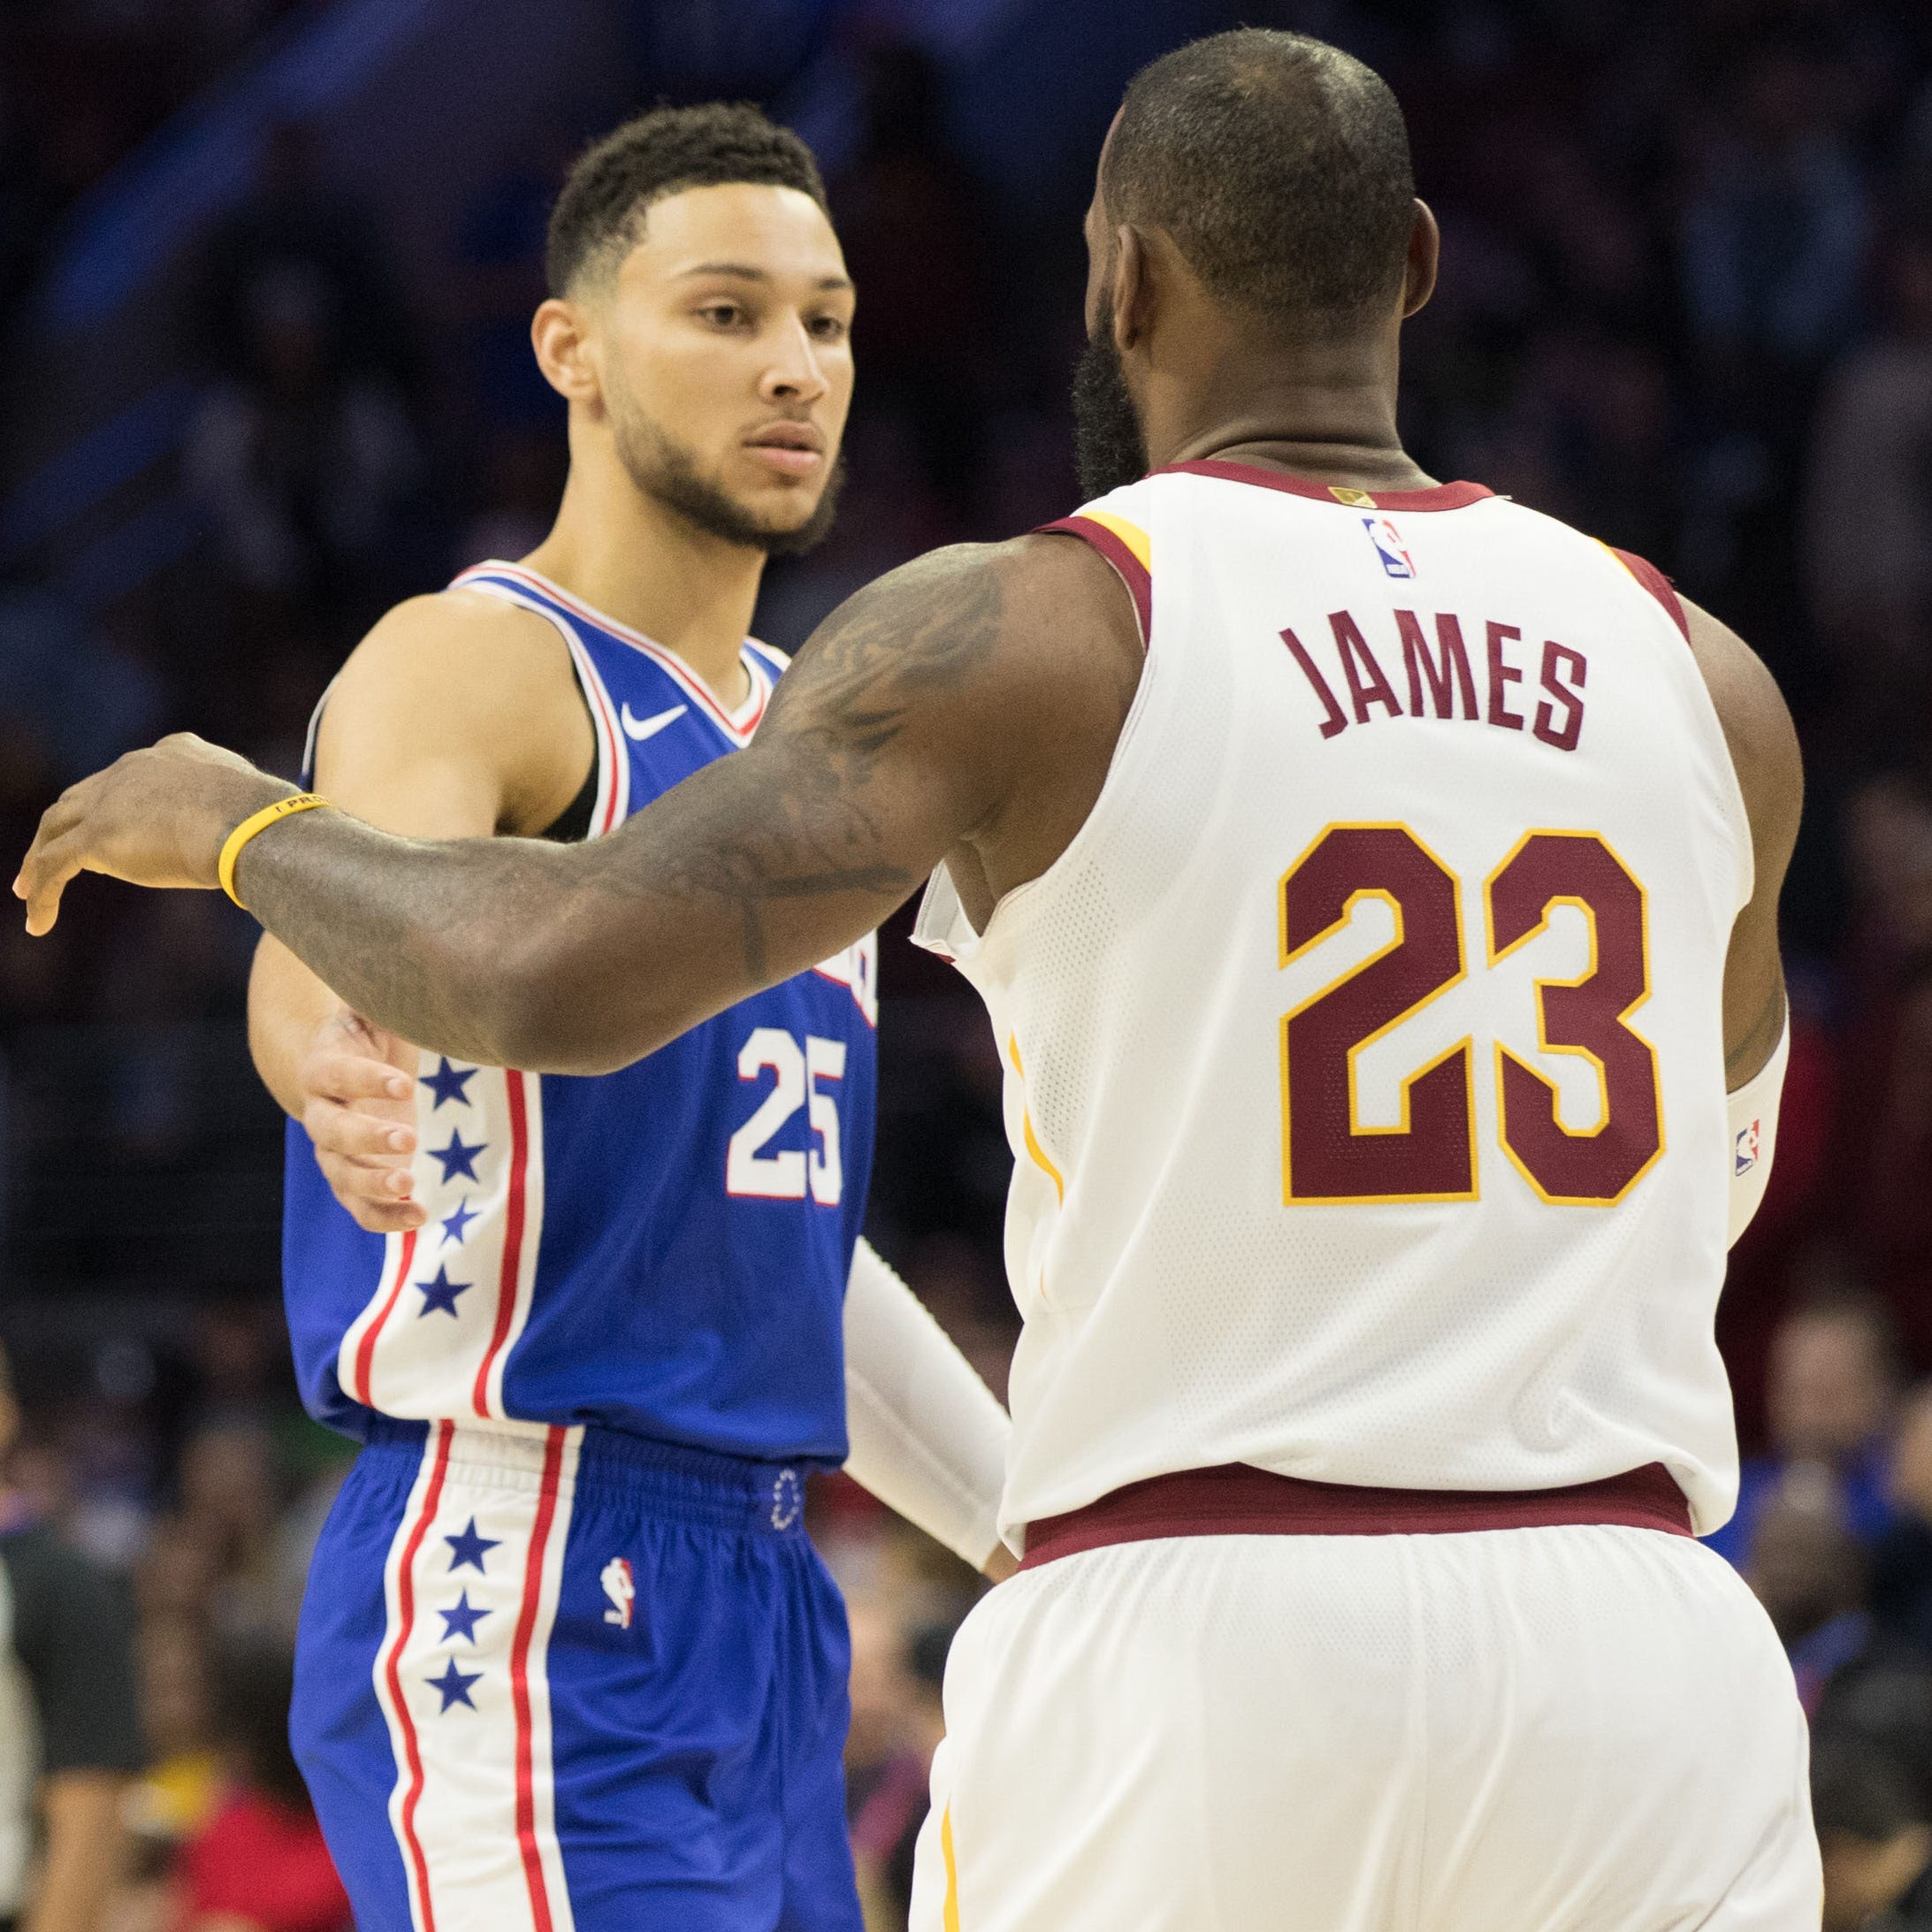 Philadelphia 76ers guard Ben Simmons (25) and Cleveland Cavaliers forward LeBron James (23) during a game at Wells Fargo Center.